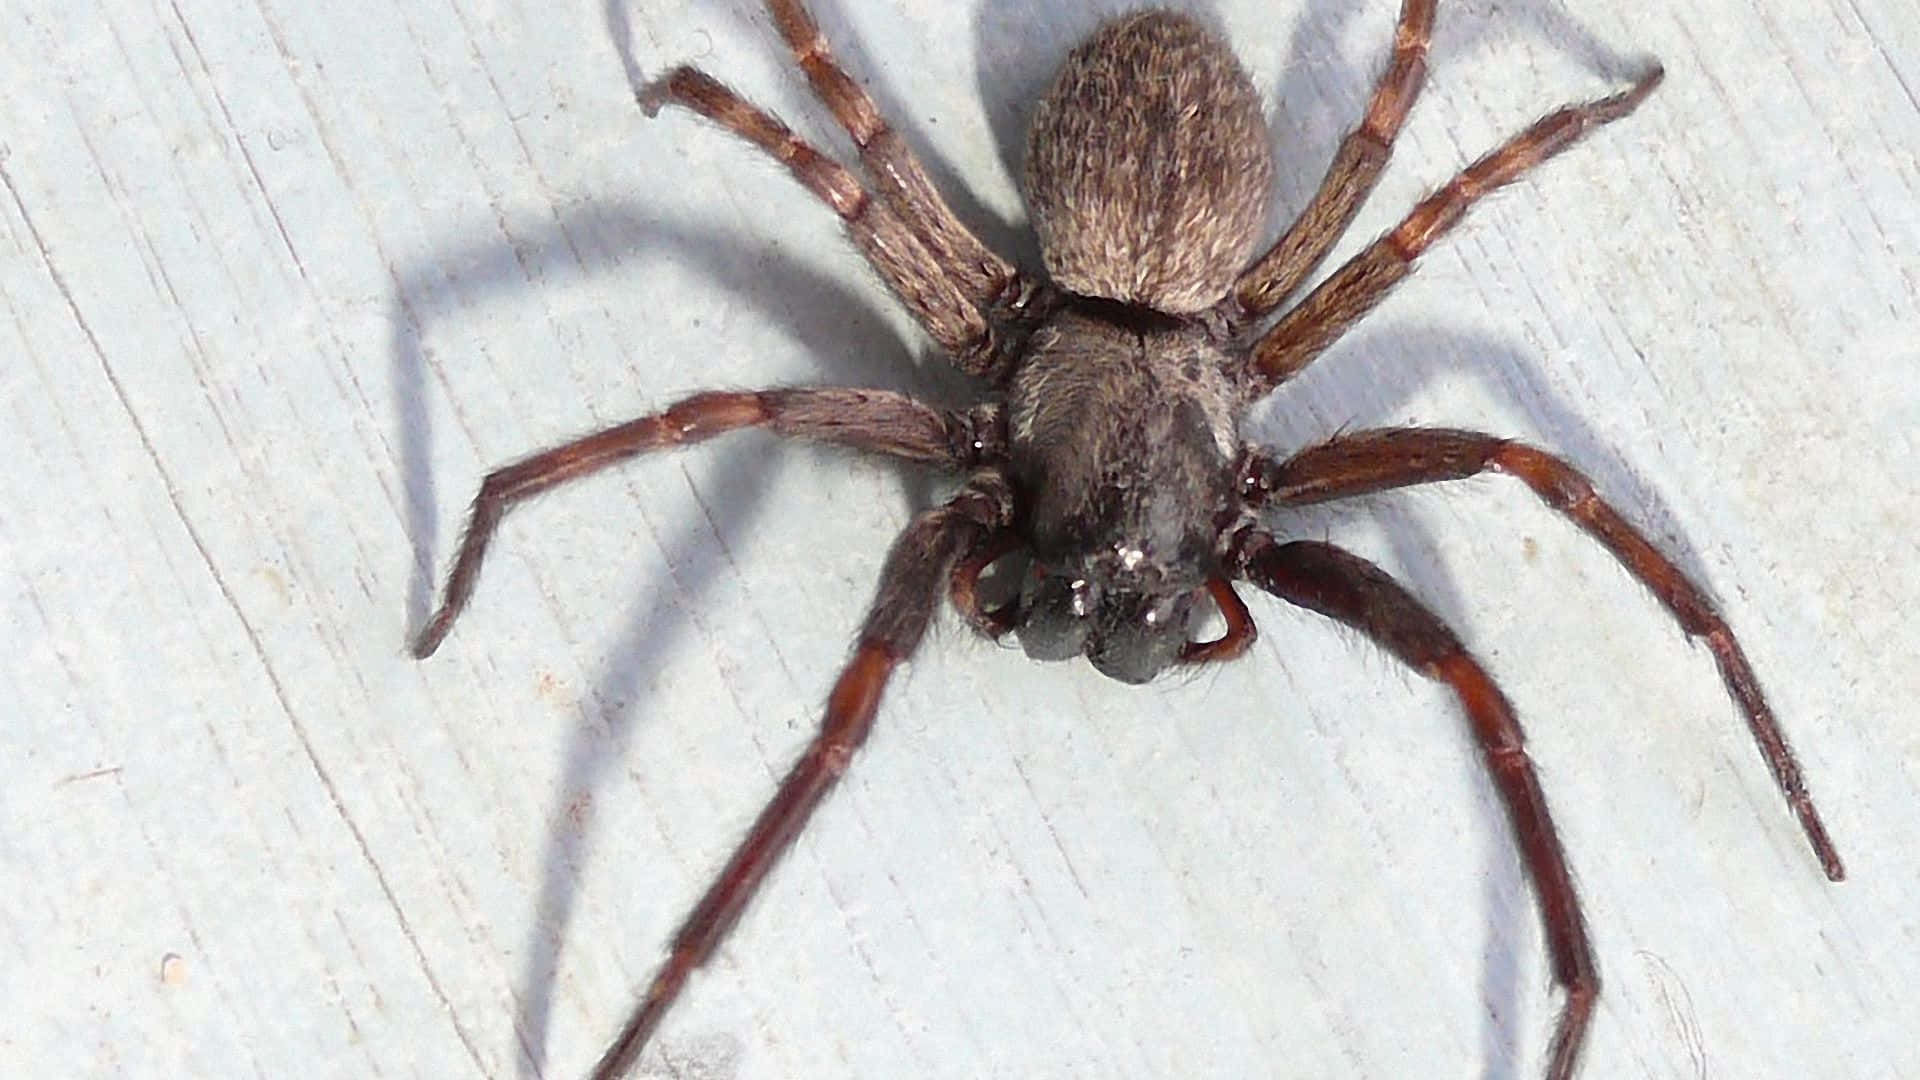 Close-up of a Brown Recluse Spider in its natural habitat Wallpaper